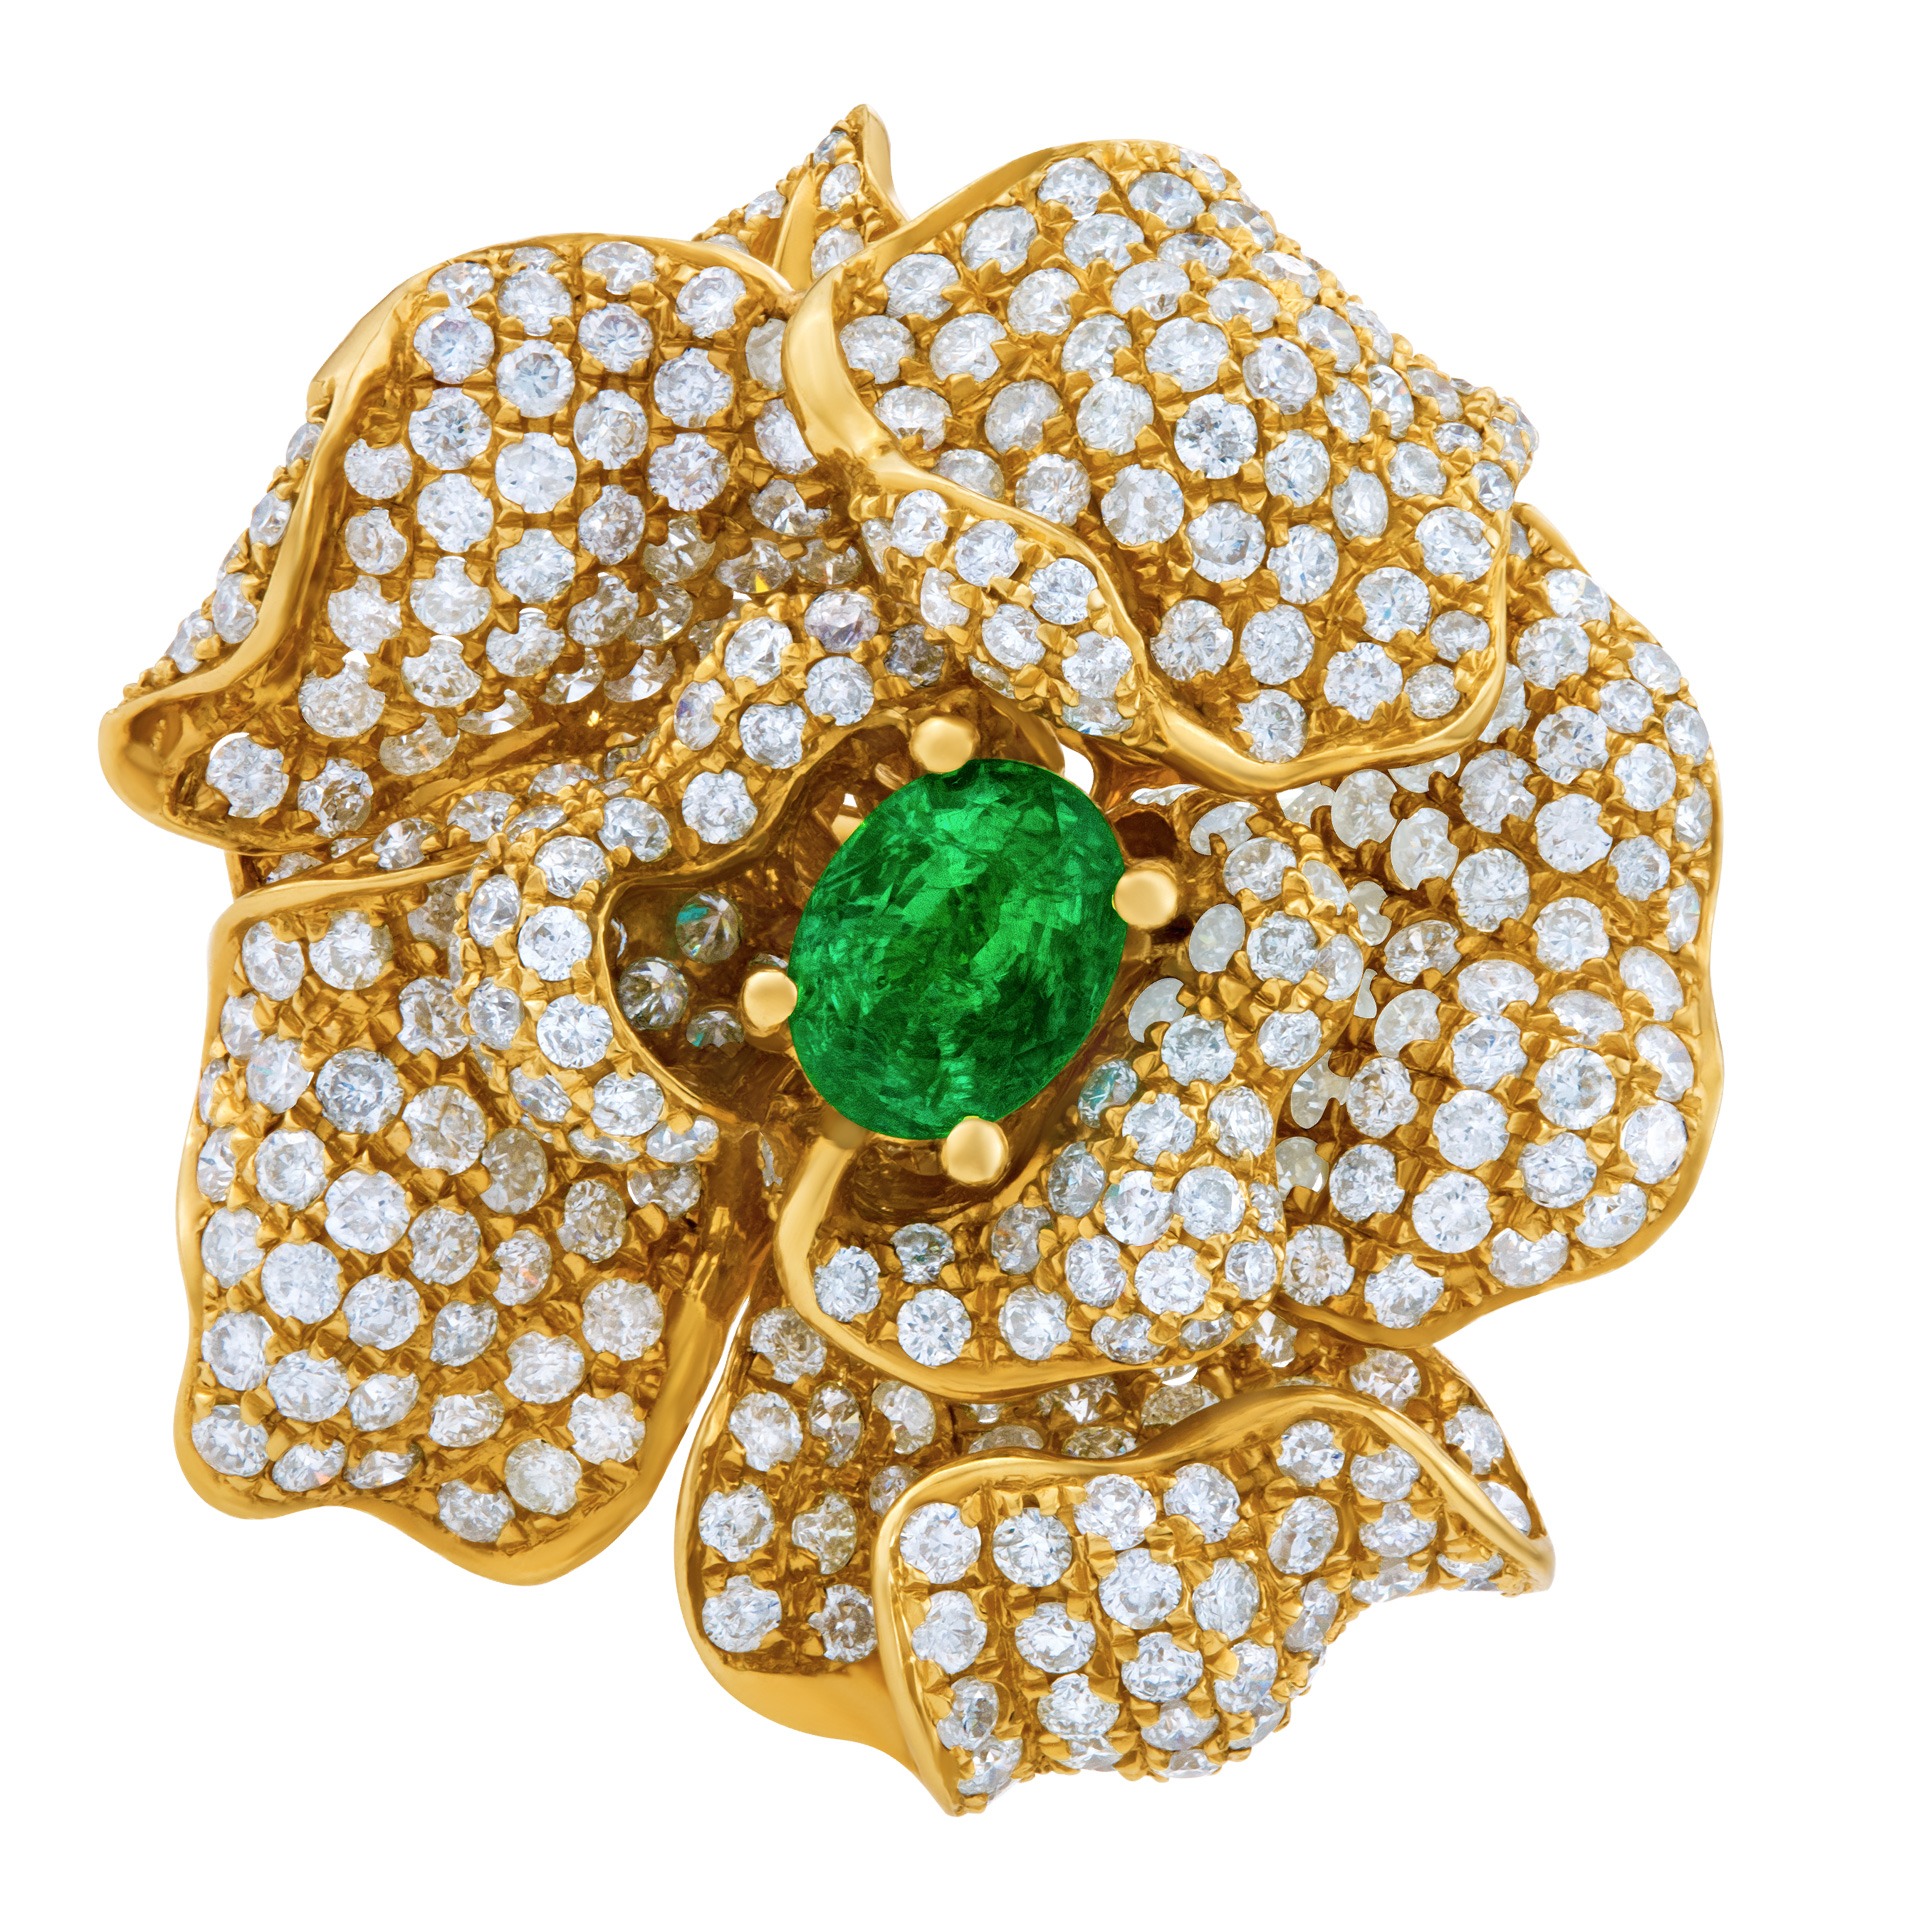 Rose style emerald and diamond ring set in 18 k gold